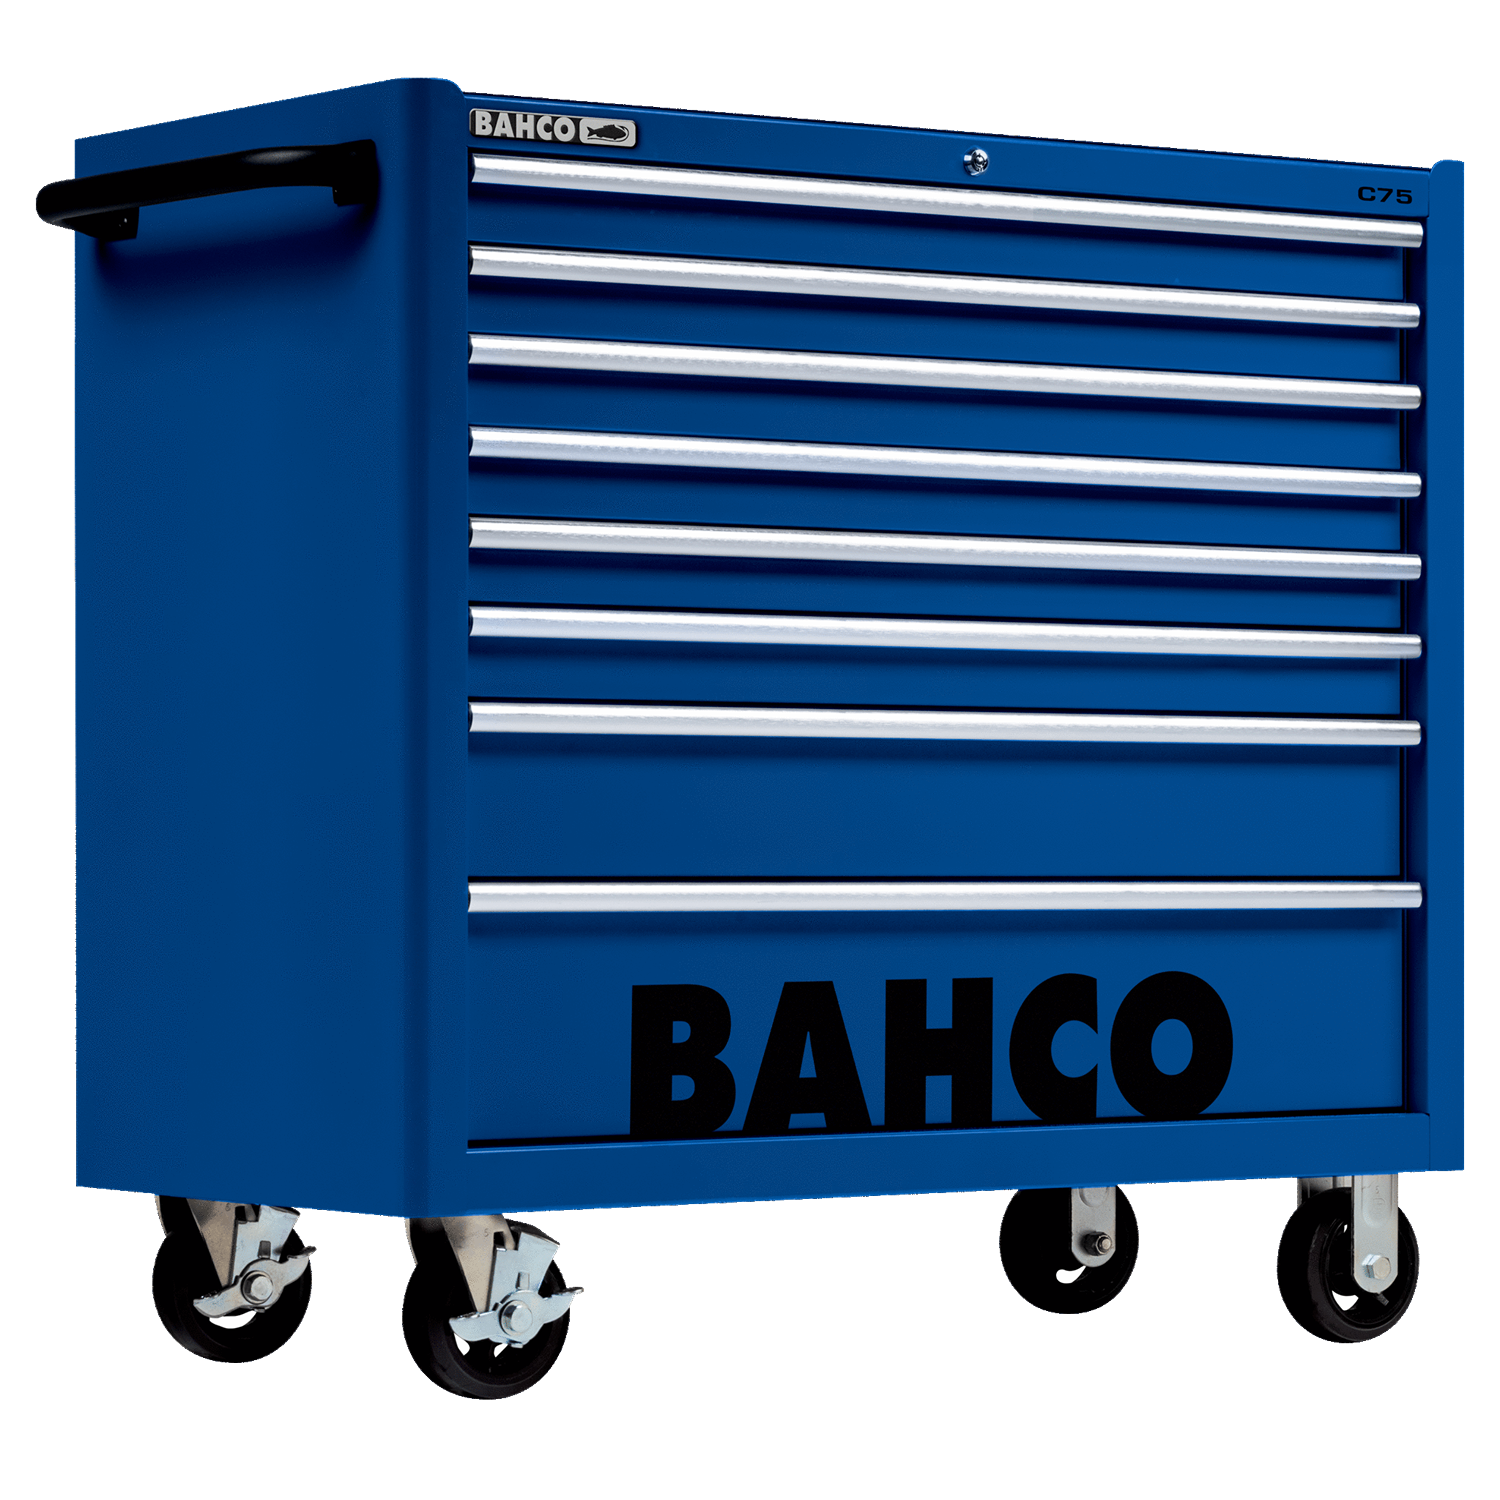 BAHCO 1475KXL8 40” Classic C75 Tool Trolleys with 8 Drawers - Premium Tool Trolley from BAHCO - Shop now at Yew Aik.